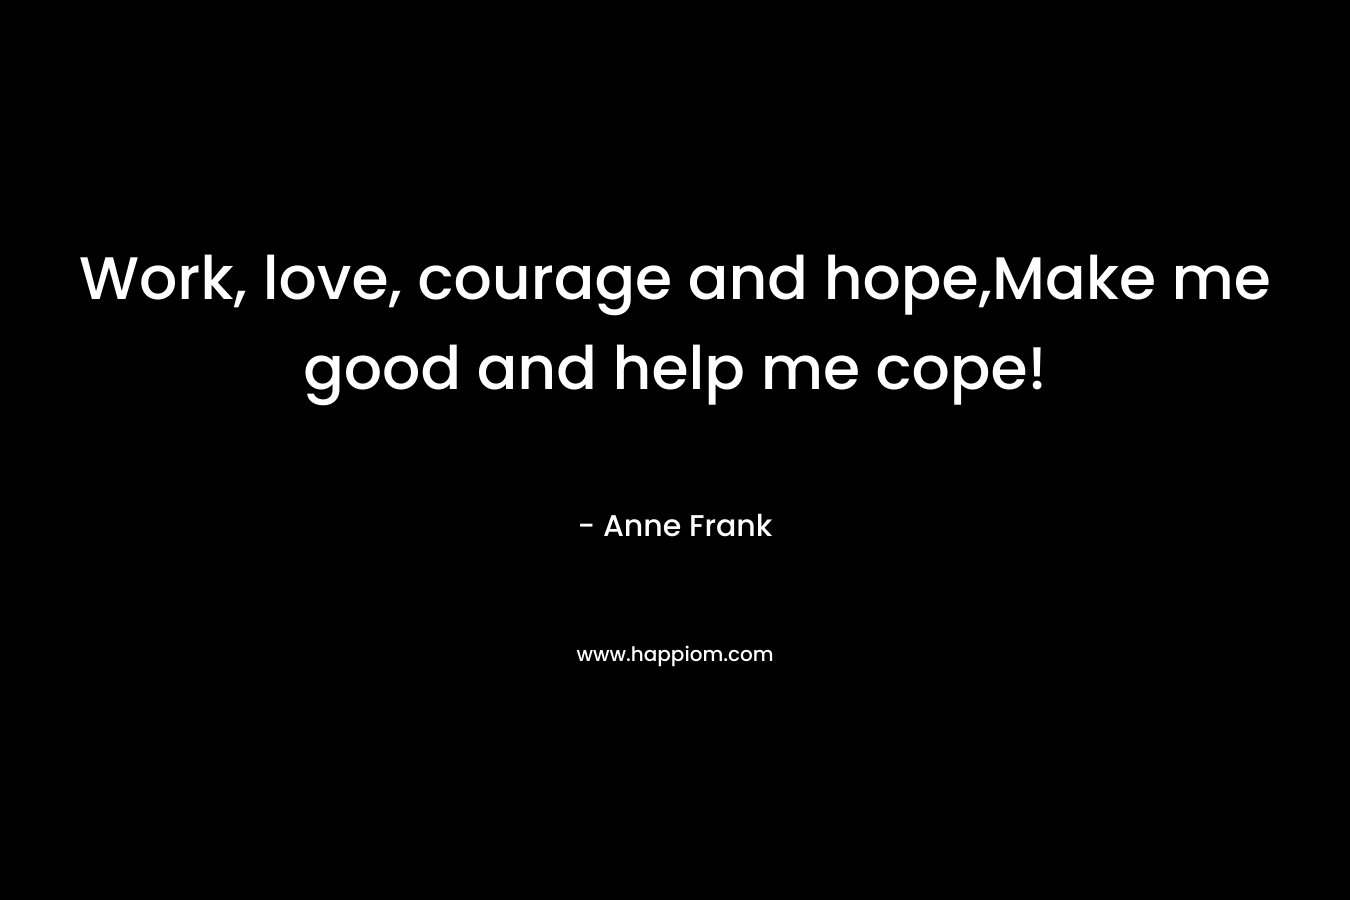 Work, love, courage and hope,Make me good and help me cope! – Anne Frank